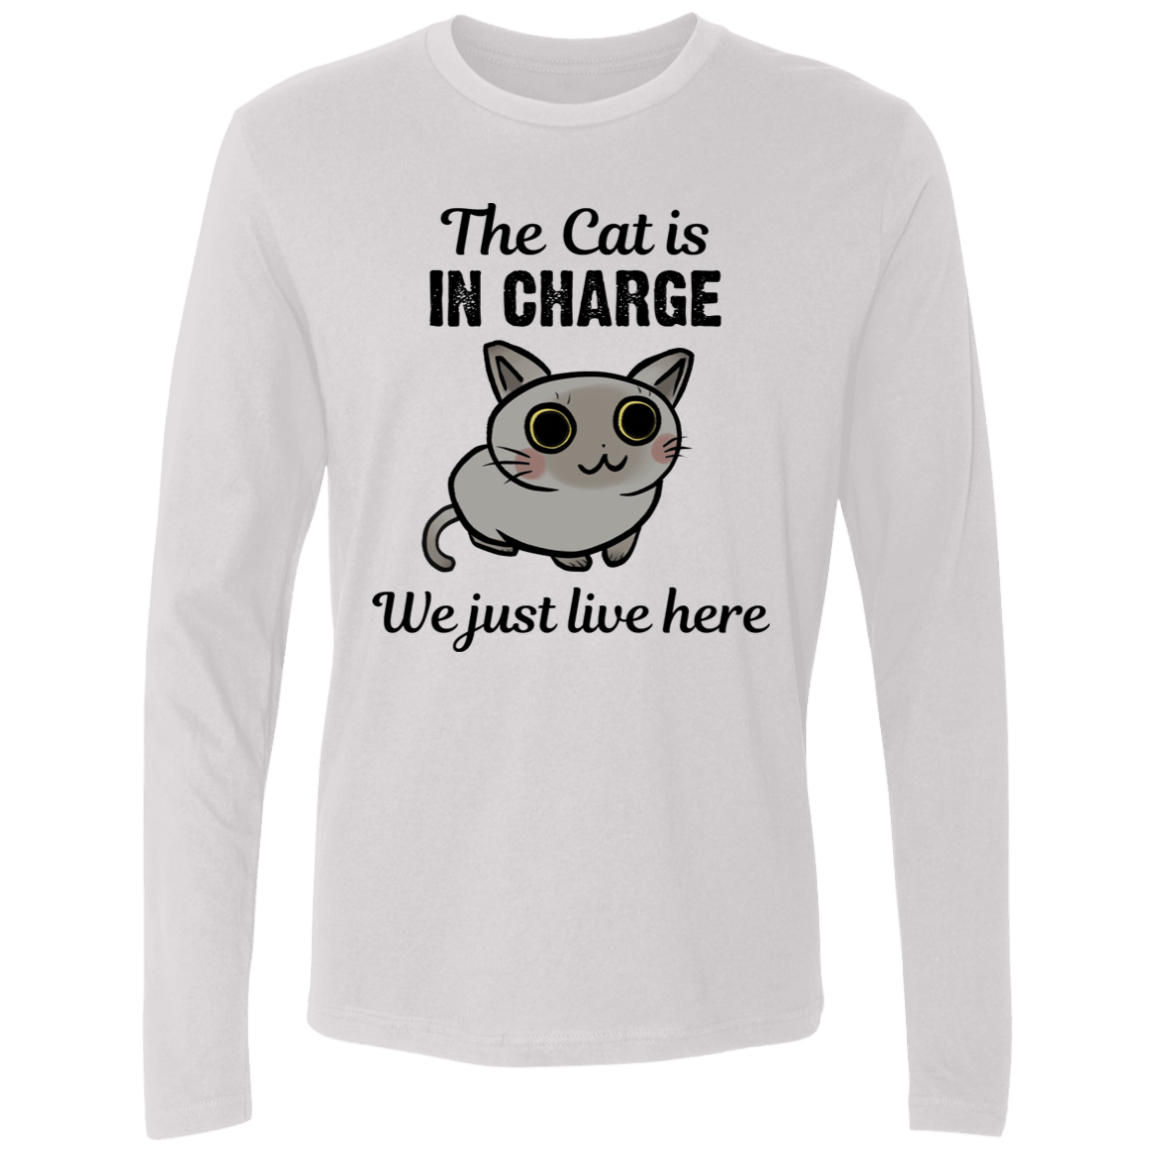 The Cat is in Charge - Long Sleeve T Shirt.